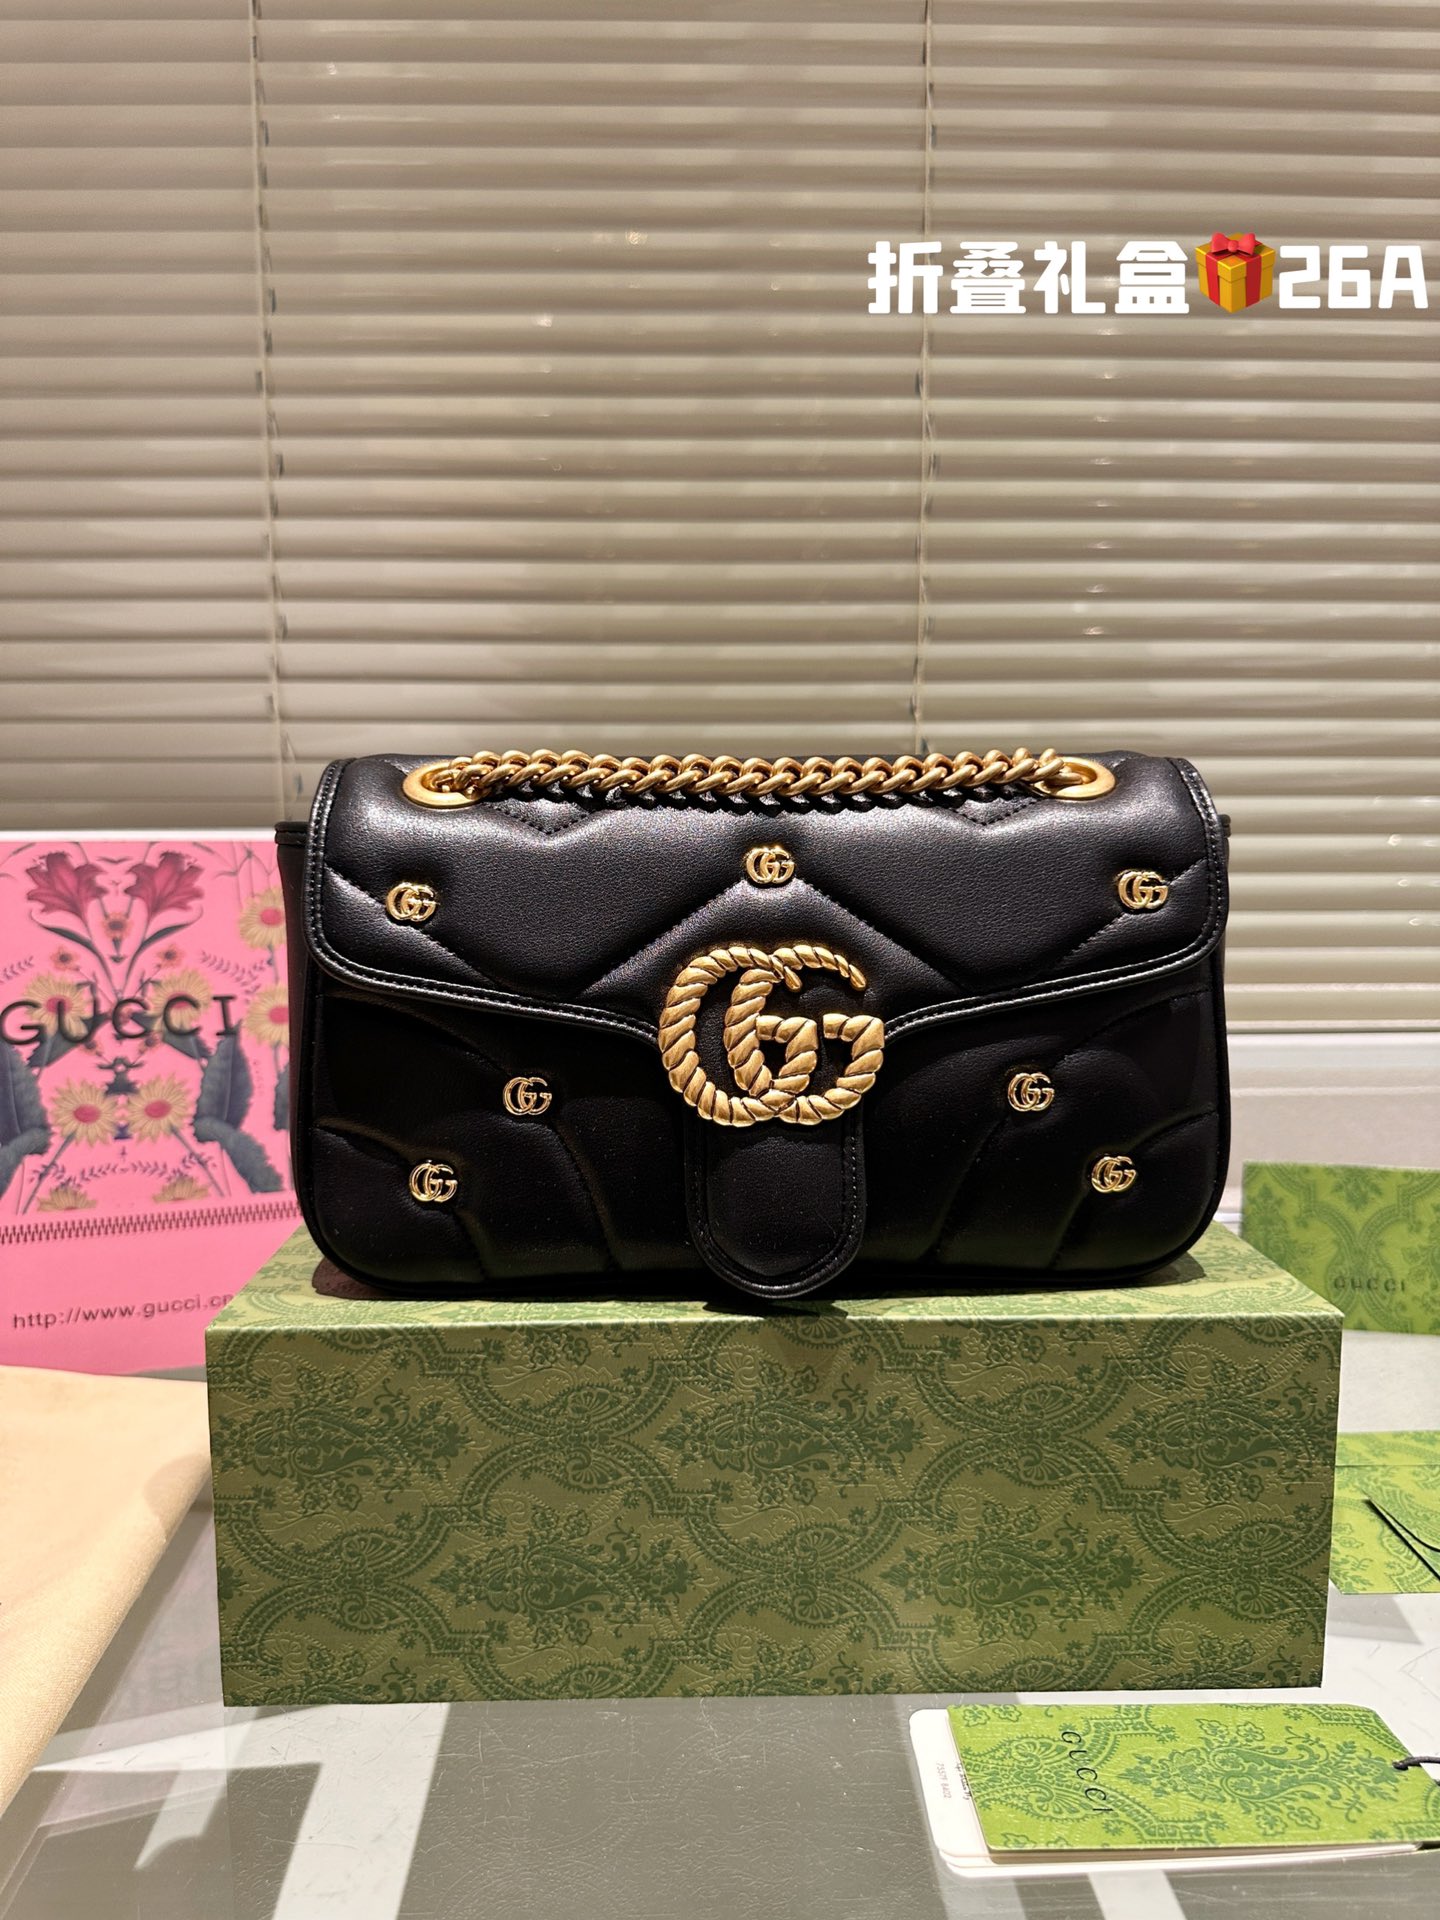 Gucci Marmont Crossbody & Shoulder Bags Replica 1:1 High Quality
 Gold Pink Cowhide